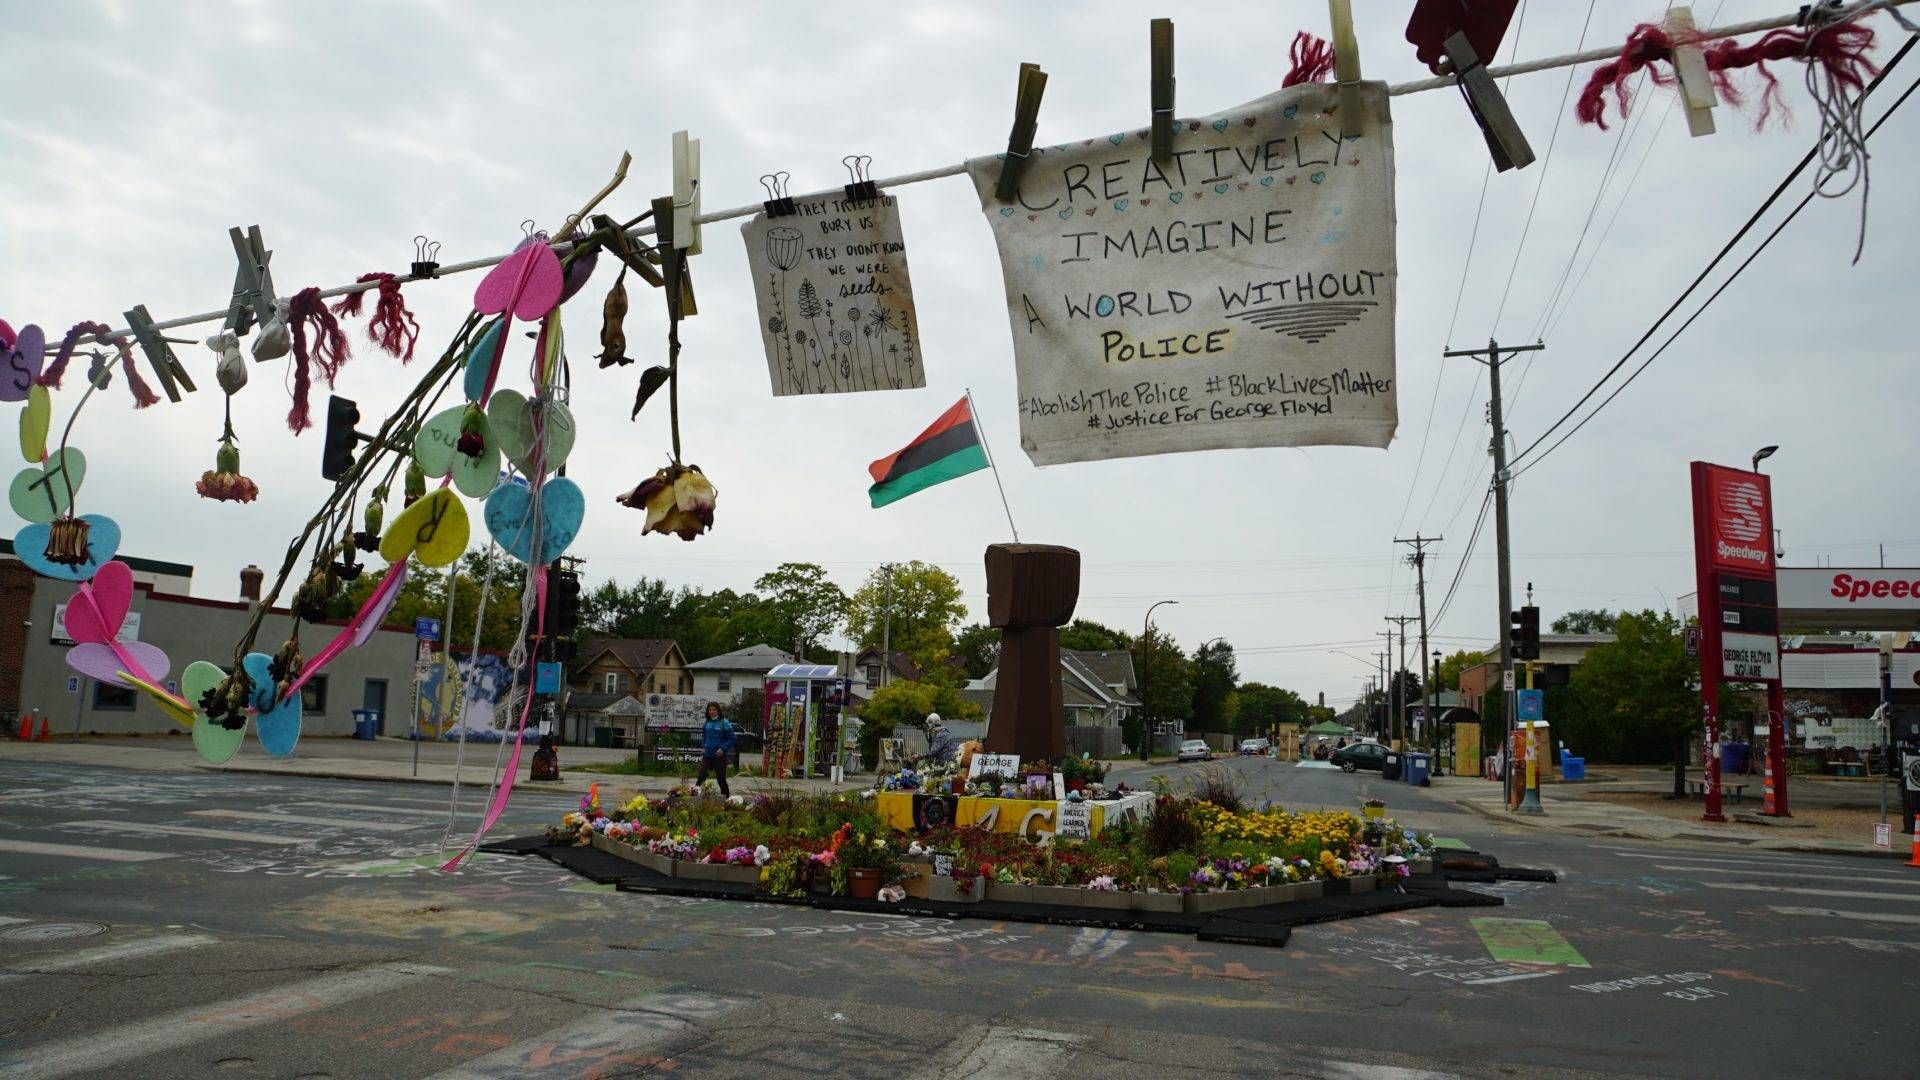 Trinkets, flowers and signs strung across the street at 38th and Chicago, where Floyd died earlier this year.